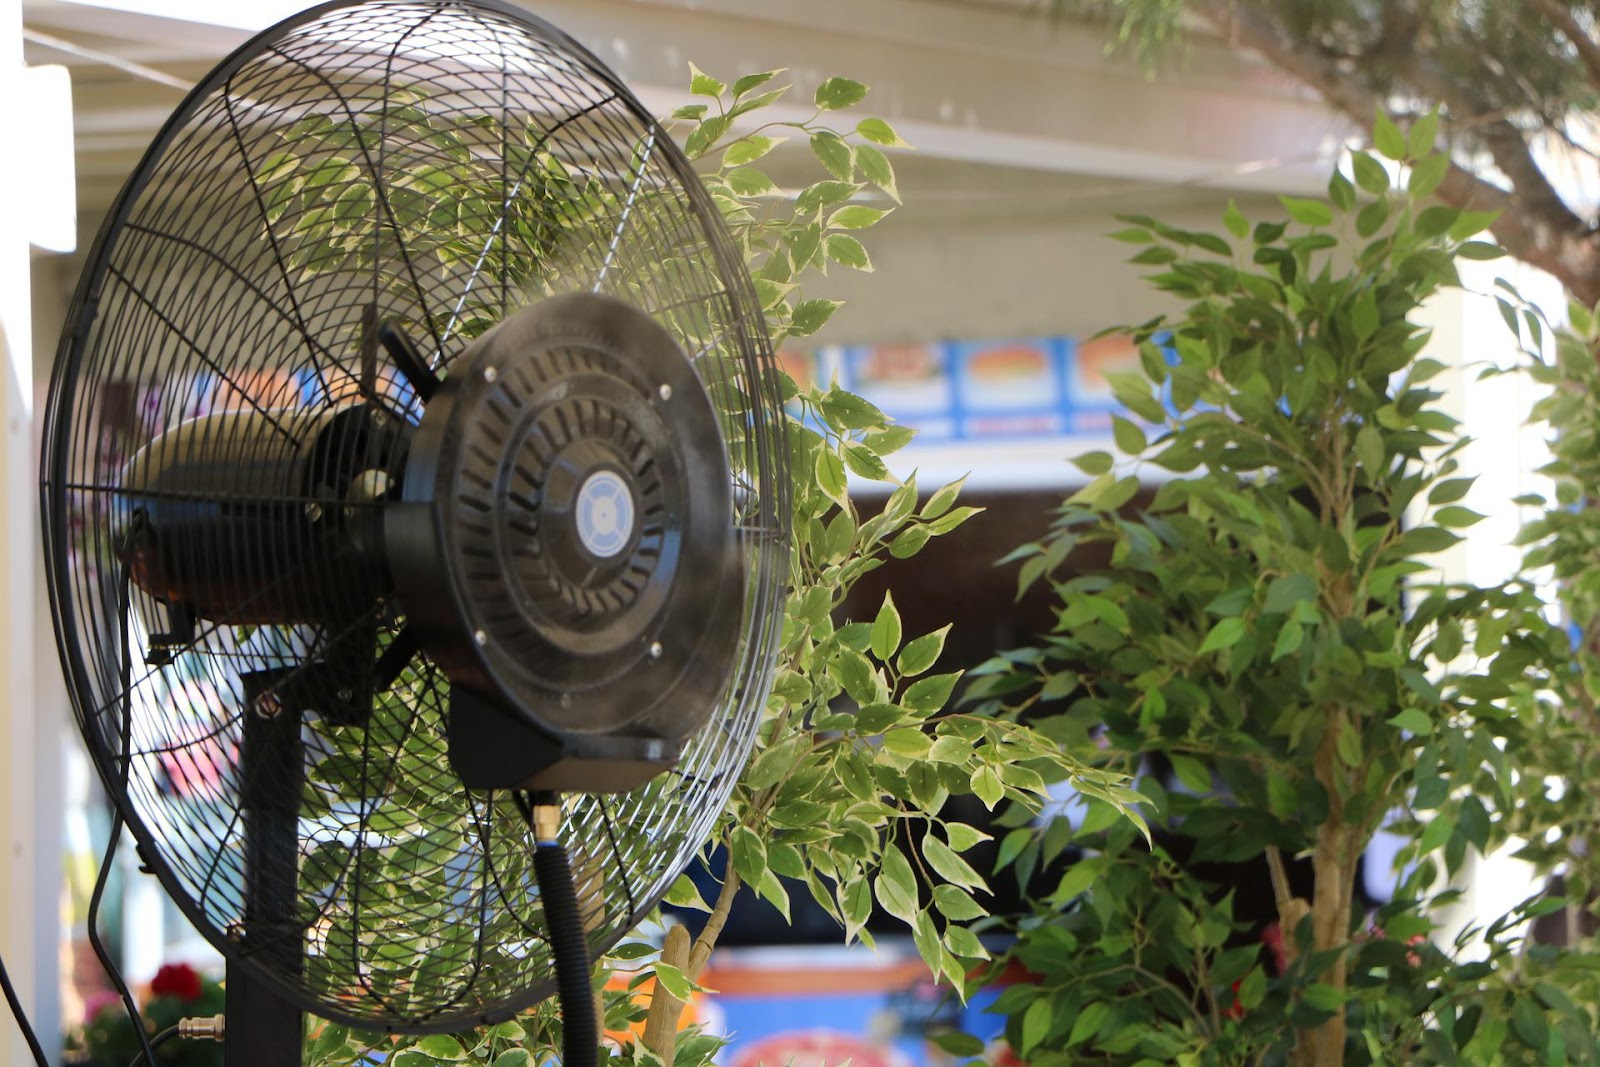 Circular fan blowing in a room with plants